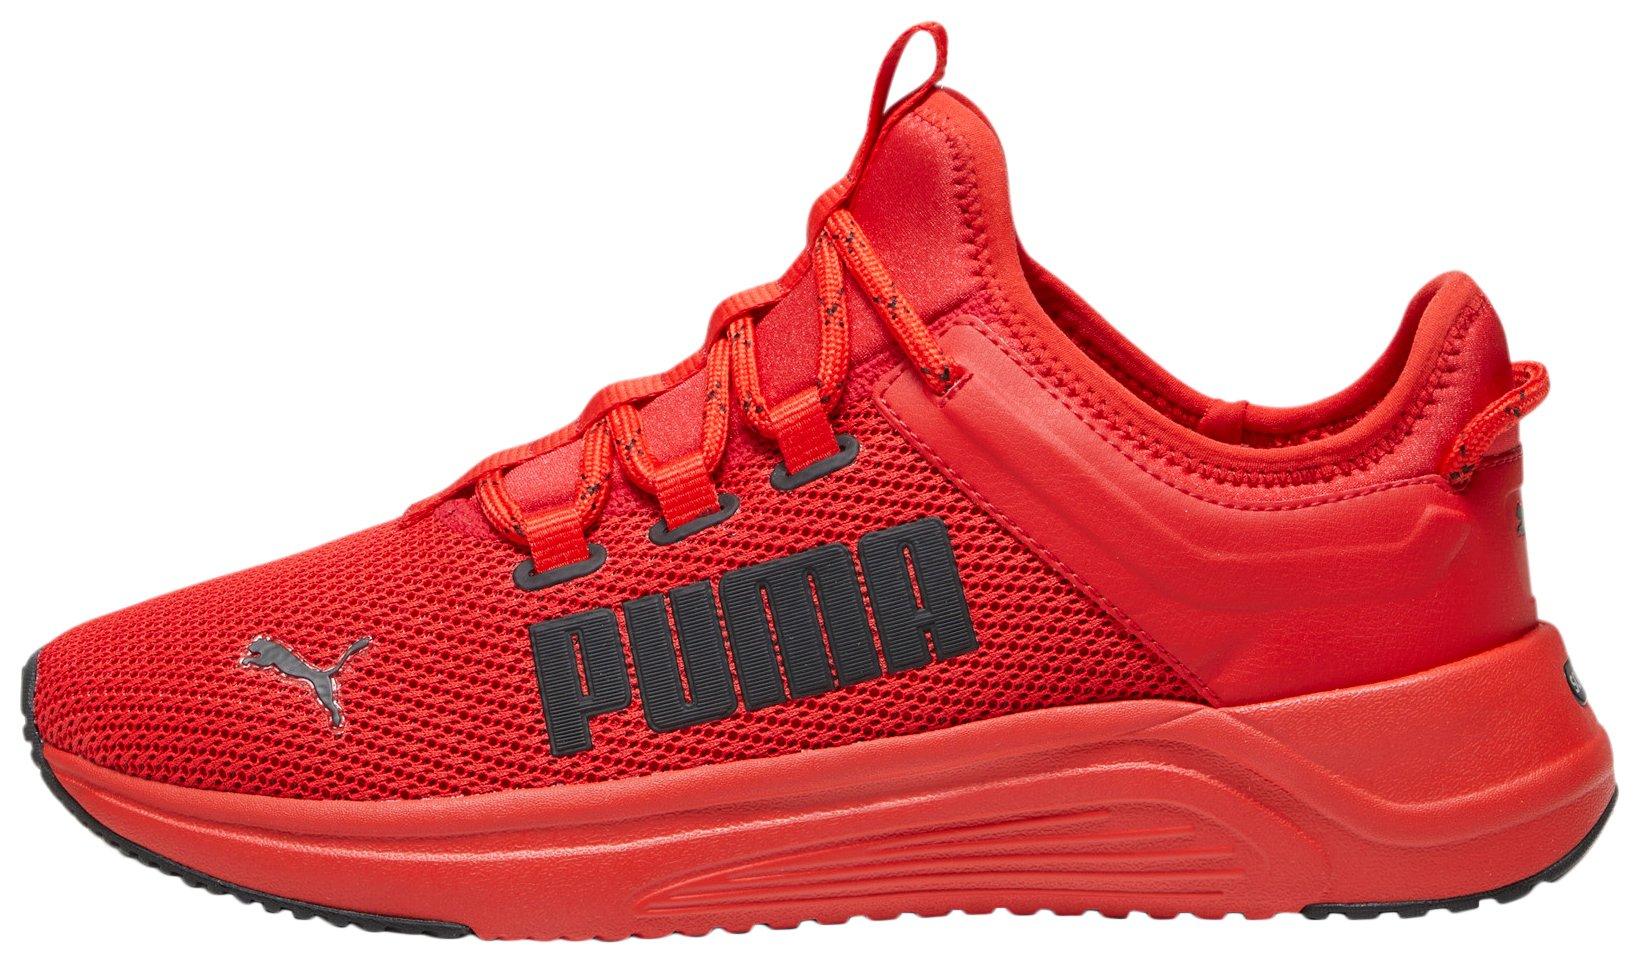 Puma Mens Softride Astro Slip On Athletic Shoes